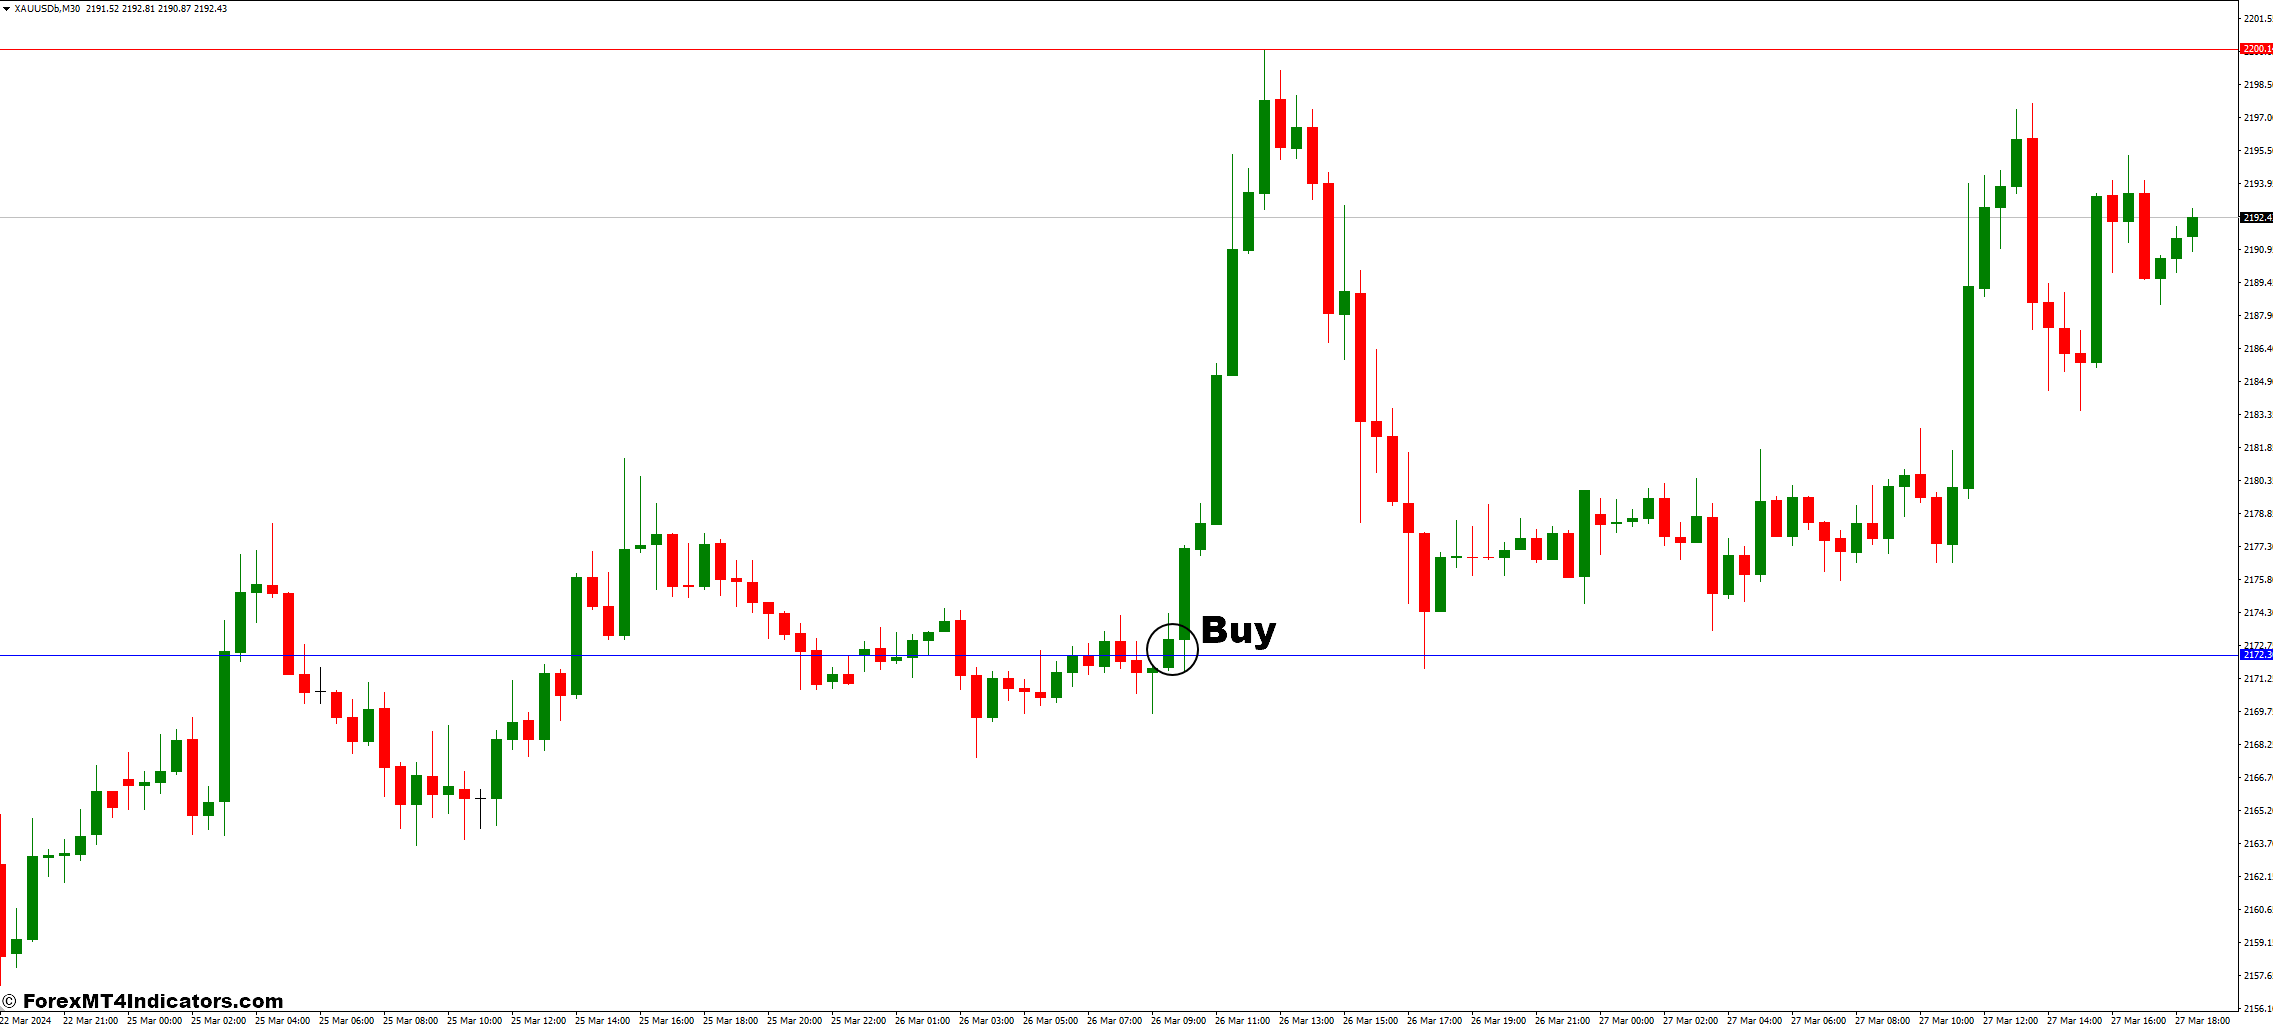 How to Trade with the Daily Support and Resistance Special Indicator - Buy Entry